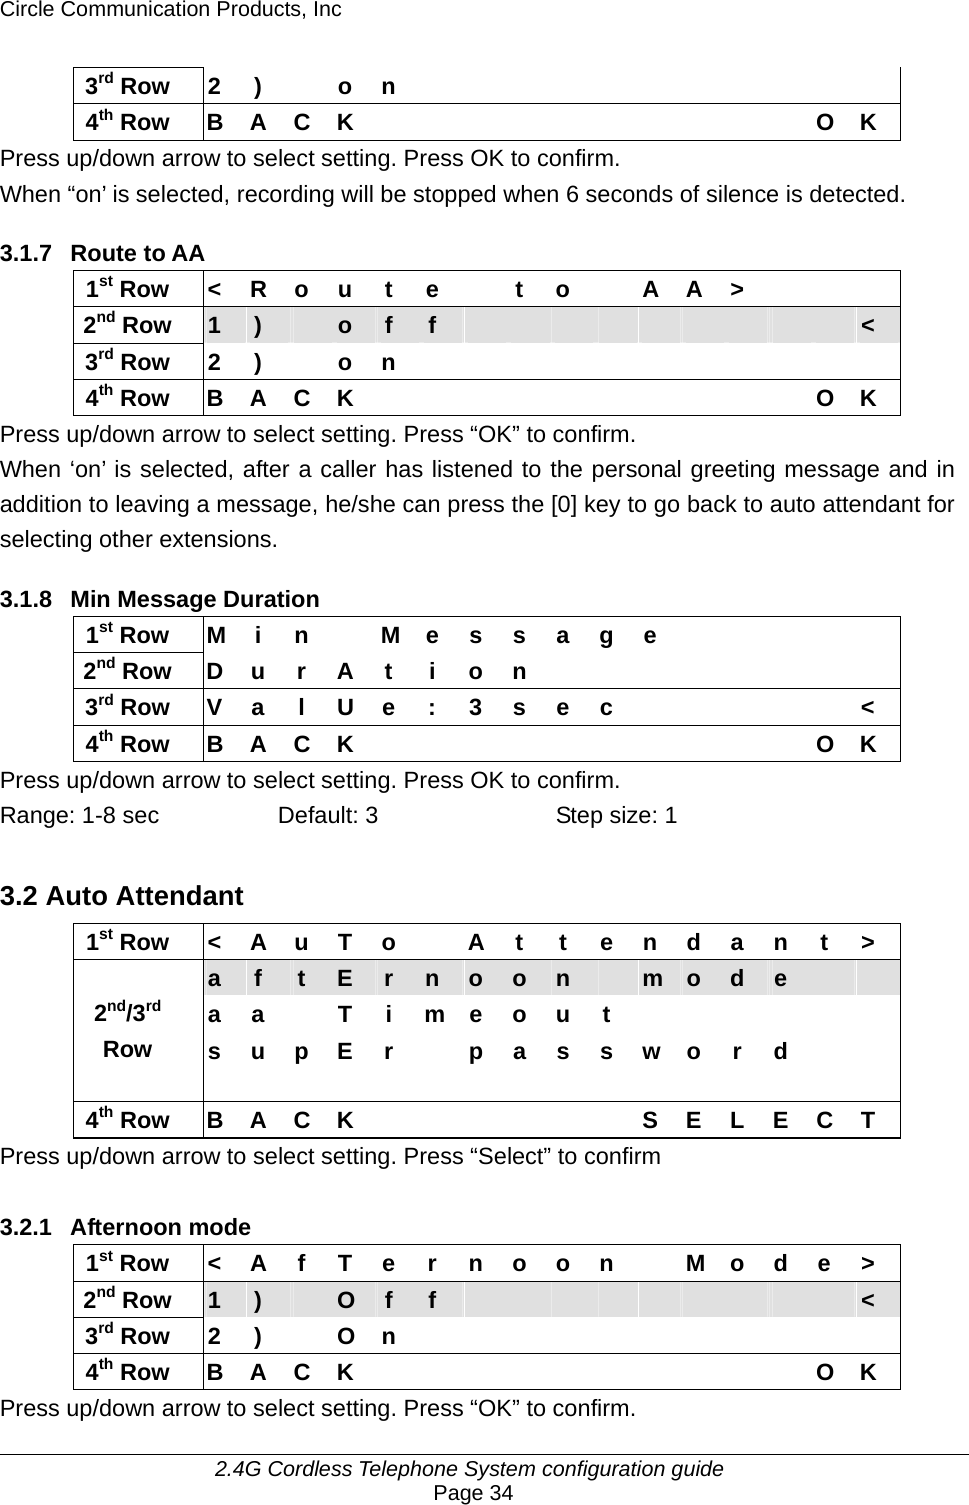 Circle Communication Products, Inc     2.4G Cordless Telephone System configuration guide Page 34 3rd Row 2 )  o n            4th Row B A C K           O K Press up/down arrow to select setting. Press OK to confirm. When “on’ is selected, recording will be stopped when 6 seconds of silence is detected.  3.1.7 Route to AA 1st Row  &lt; R o u t e    t o   A A &gt;       2nd Row  1  )   o  f  f                    &lt; 3rd Row 2 )  o n            4th Row B A C K           O K Press up/down arrow to select setting. Press “OK” to confirm.   When ‘on’ is selected, after a caller has listened to the personal greeting message and in addition to leaving a message, he/she can press the [0] key to go back to auto attendant for selecting other extensions.  3.1.8 Min Message Duration 1st Row  M i n    M e s s a g e           2nd Row D u r A t i o n         3rd Row  V a l U e : 3 s e c            &lt; 4th Row B A C K           O K Press up/down arrow to select setting. Press OK to confirm.   Range: 1-8 sec  Default: 3  Step size: 1  3.2 Auto Attendant 1st Row  &lt; A u T o    A t  t e n d a n t &gt; a  f  t  E  r  n  o  o  n   m  o  d  e     a a  T i m e o u t        2nd/3rd Row  s u p E r    p a s s w o r d     4th Row B A C K       S E L E C T Press up/down arrow to select setting. Press “Select” to confirm  3.2.1 Afternoon mode 1st Row  &lt; A f T e r n o o n    M o d e &gt; 2nd Row  1  )   O  f  f                    &lt; 3rd Row 2 )  O n            4th Row B A C K           O K Press up/down arrow to select setting. Press “OK” to confirm. 